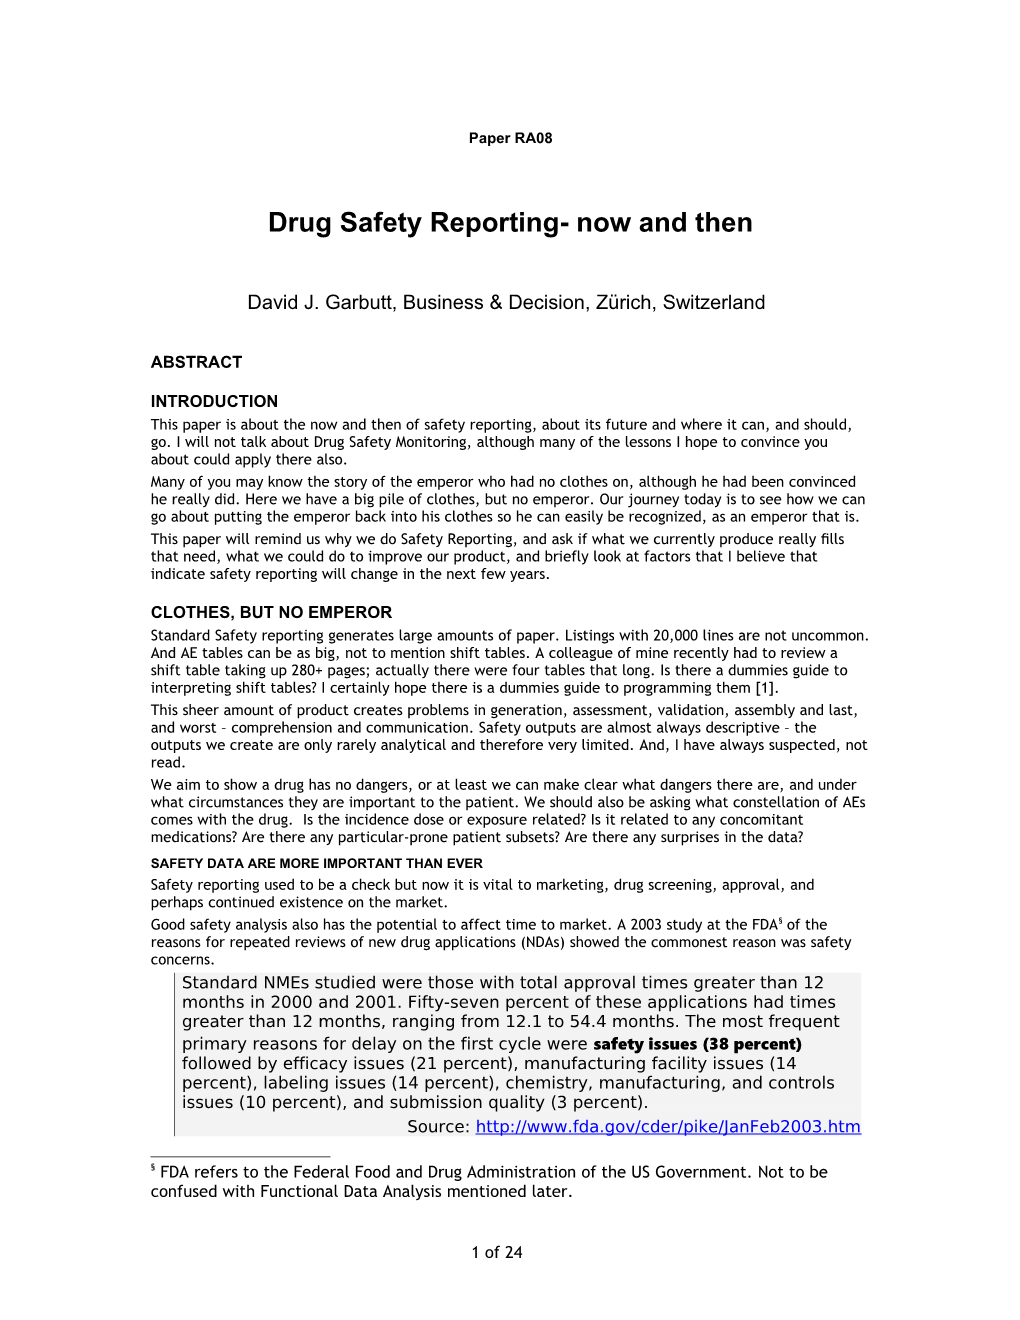 Drug Safety Reporting- Now and Then